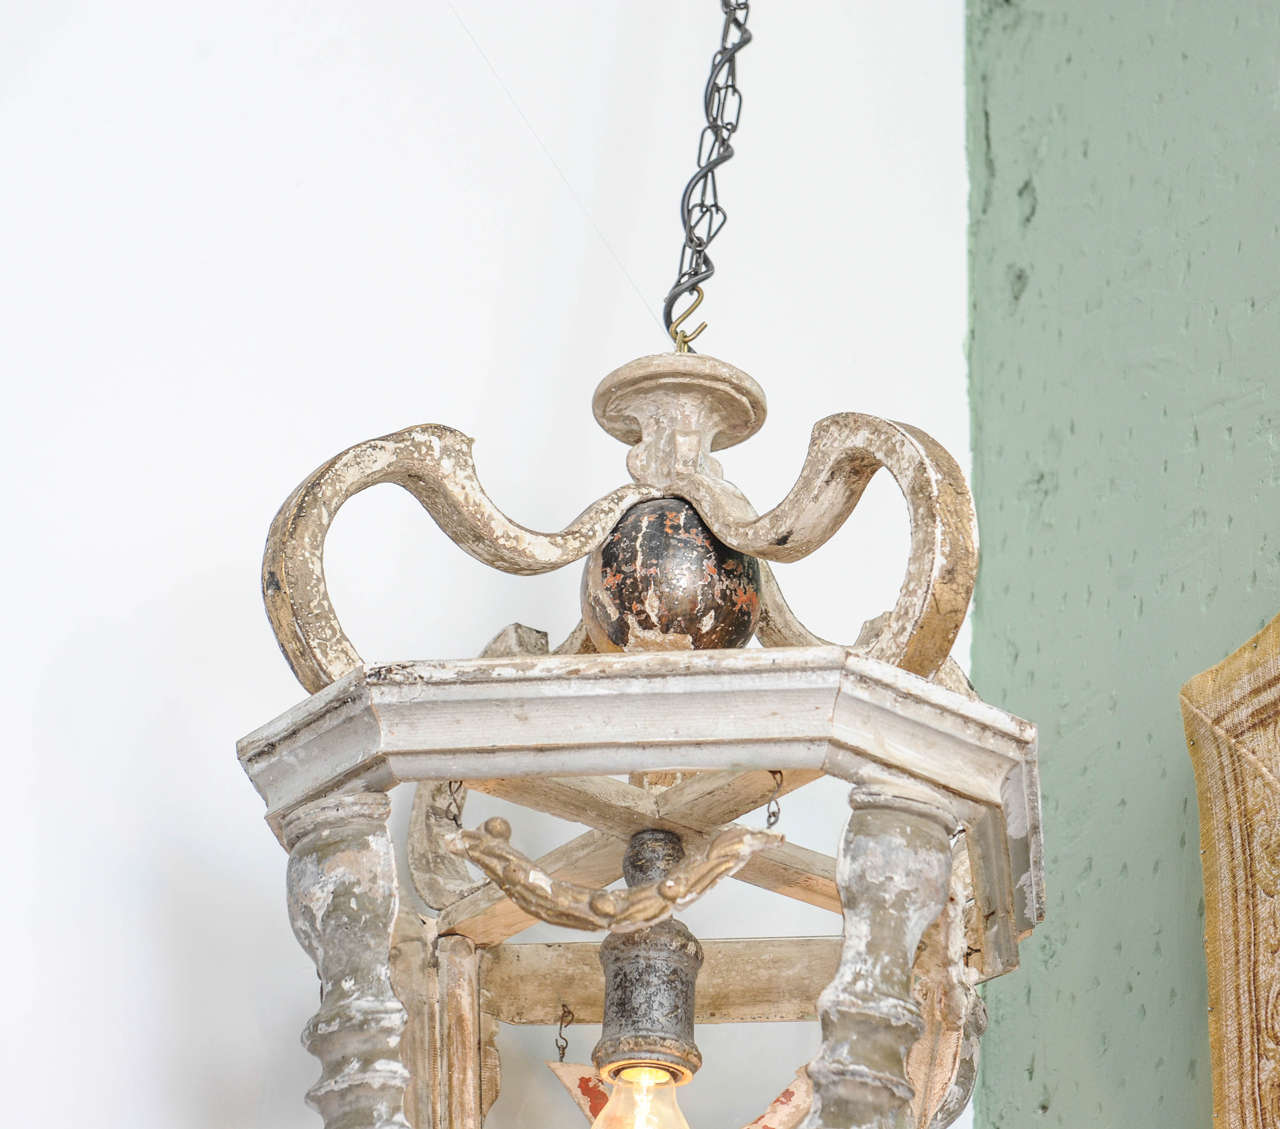 20th Century French Lantern Made of 18th and 19th Century Elements 4